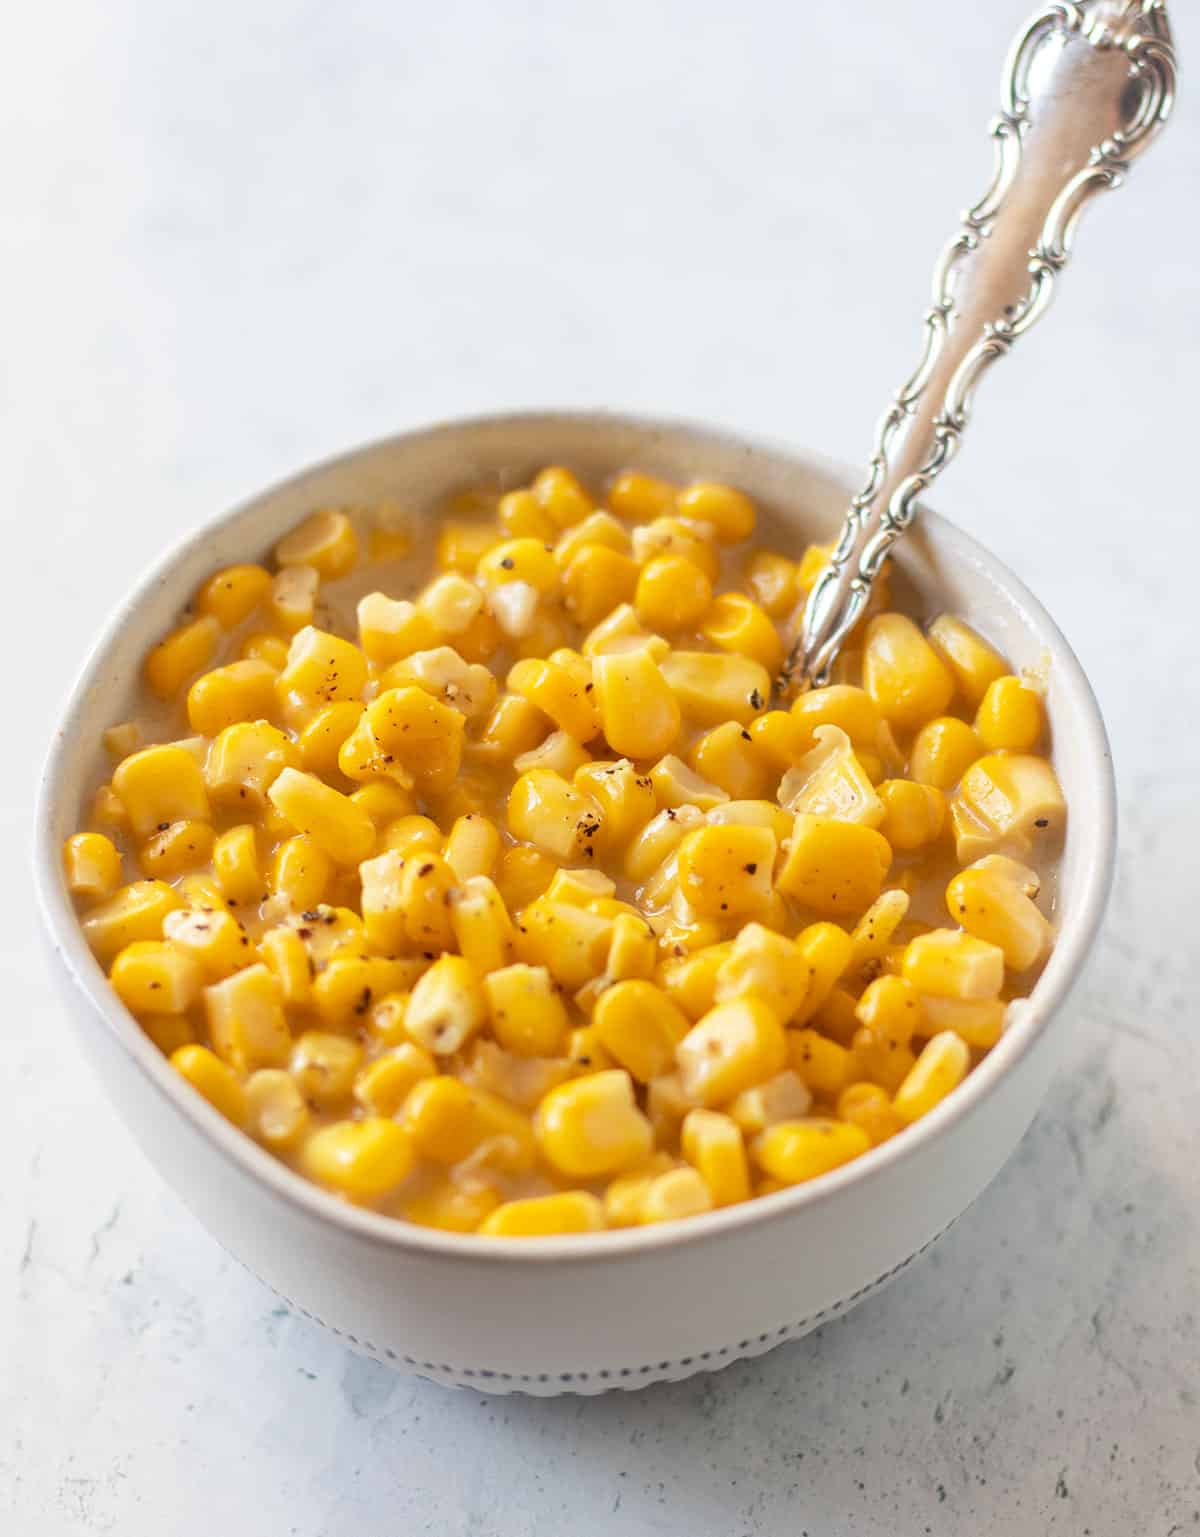 vegan creamed corn in a white bowl with blue trim and a silver spoon for serving.